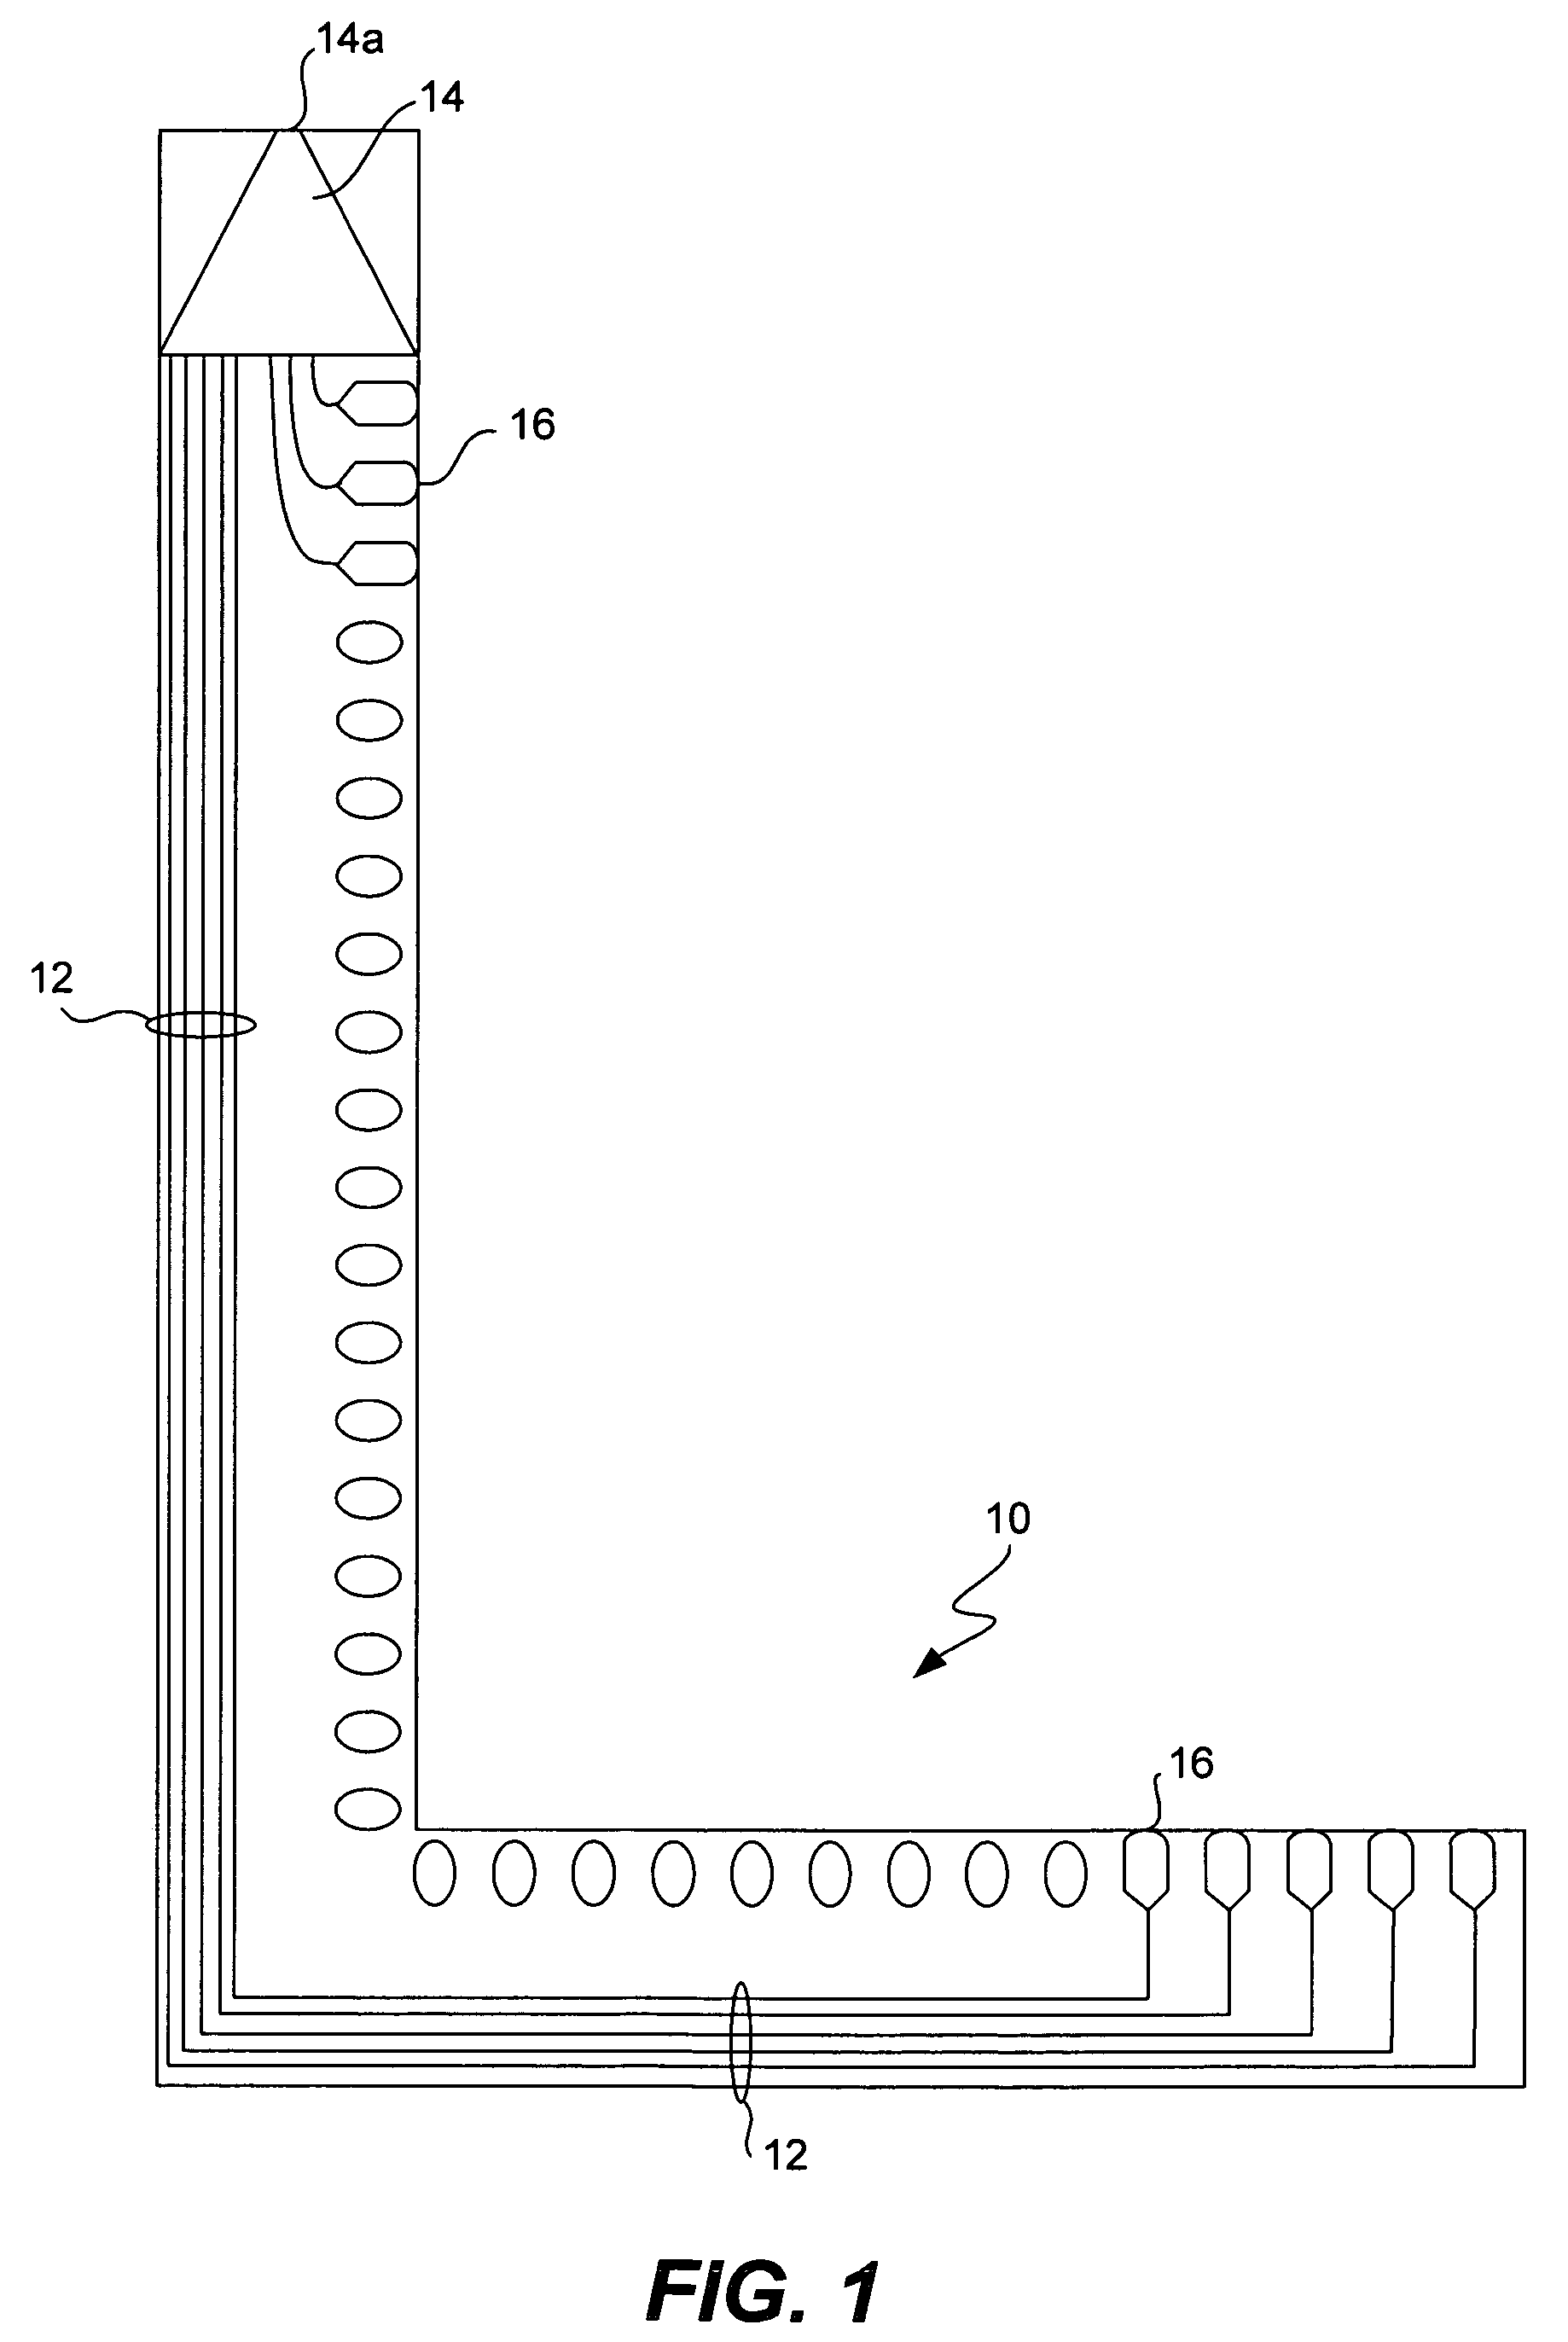 Apparatus and method for an improved lens structure for polymer wave guides which maximizes free space light coupling